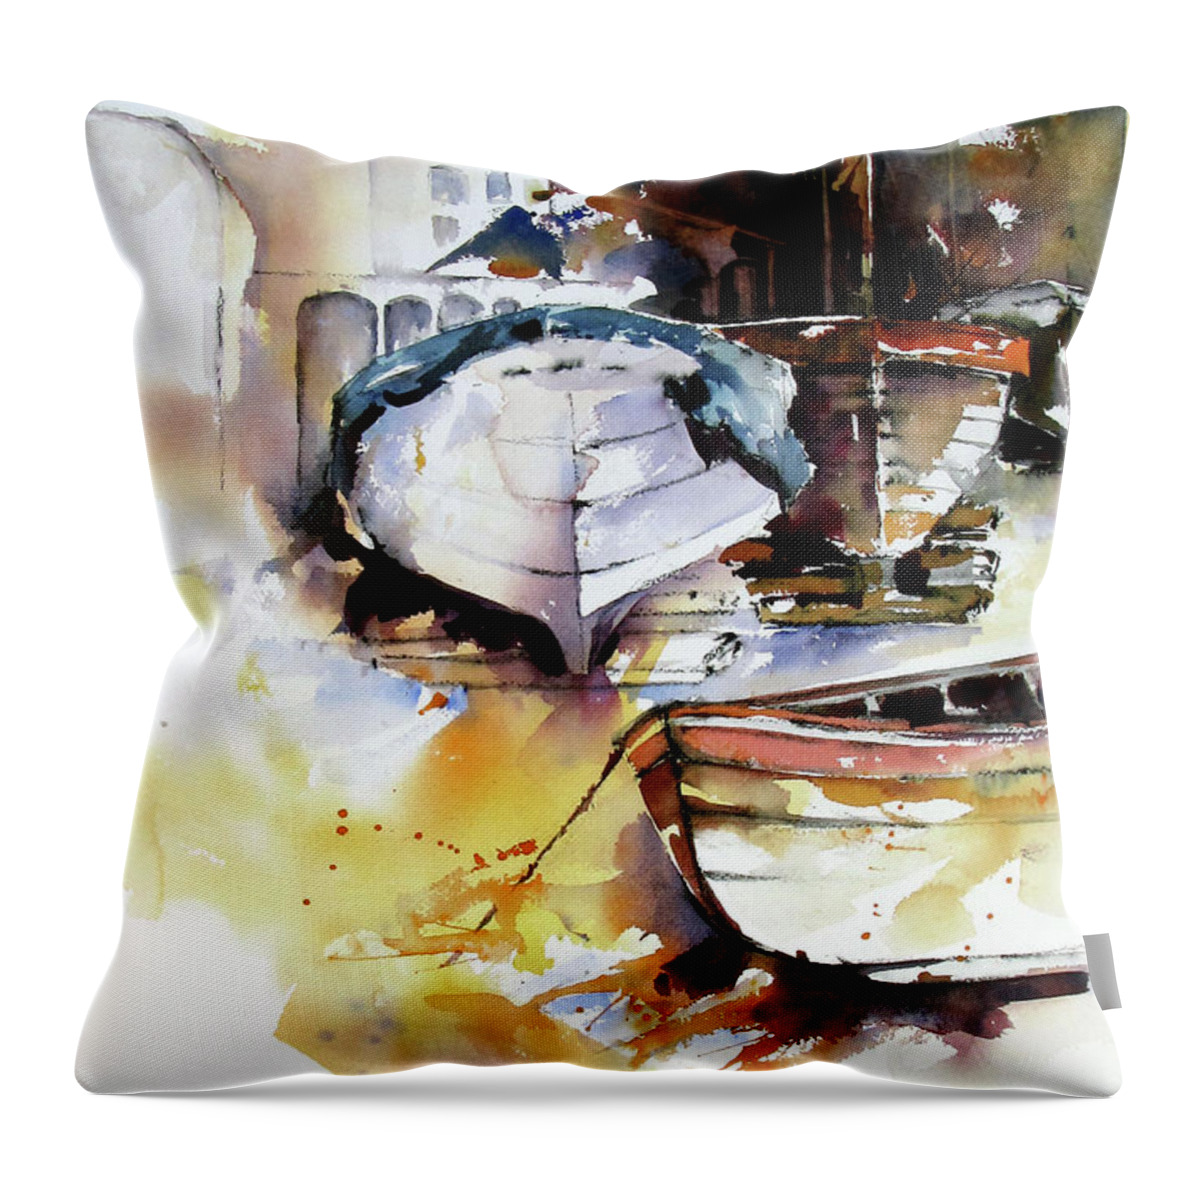 Boats Throw Pillow featuring the painting Fishing Boats by Rae Andrews